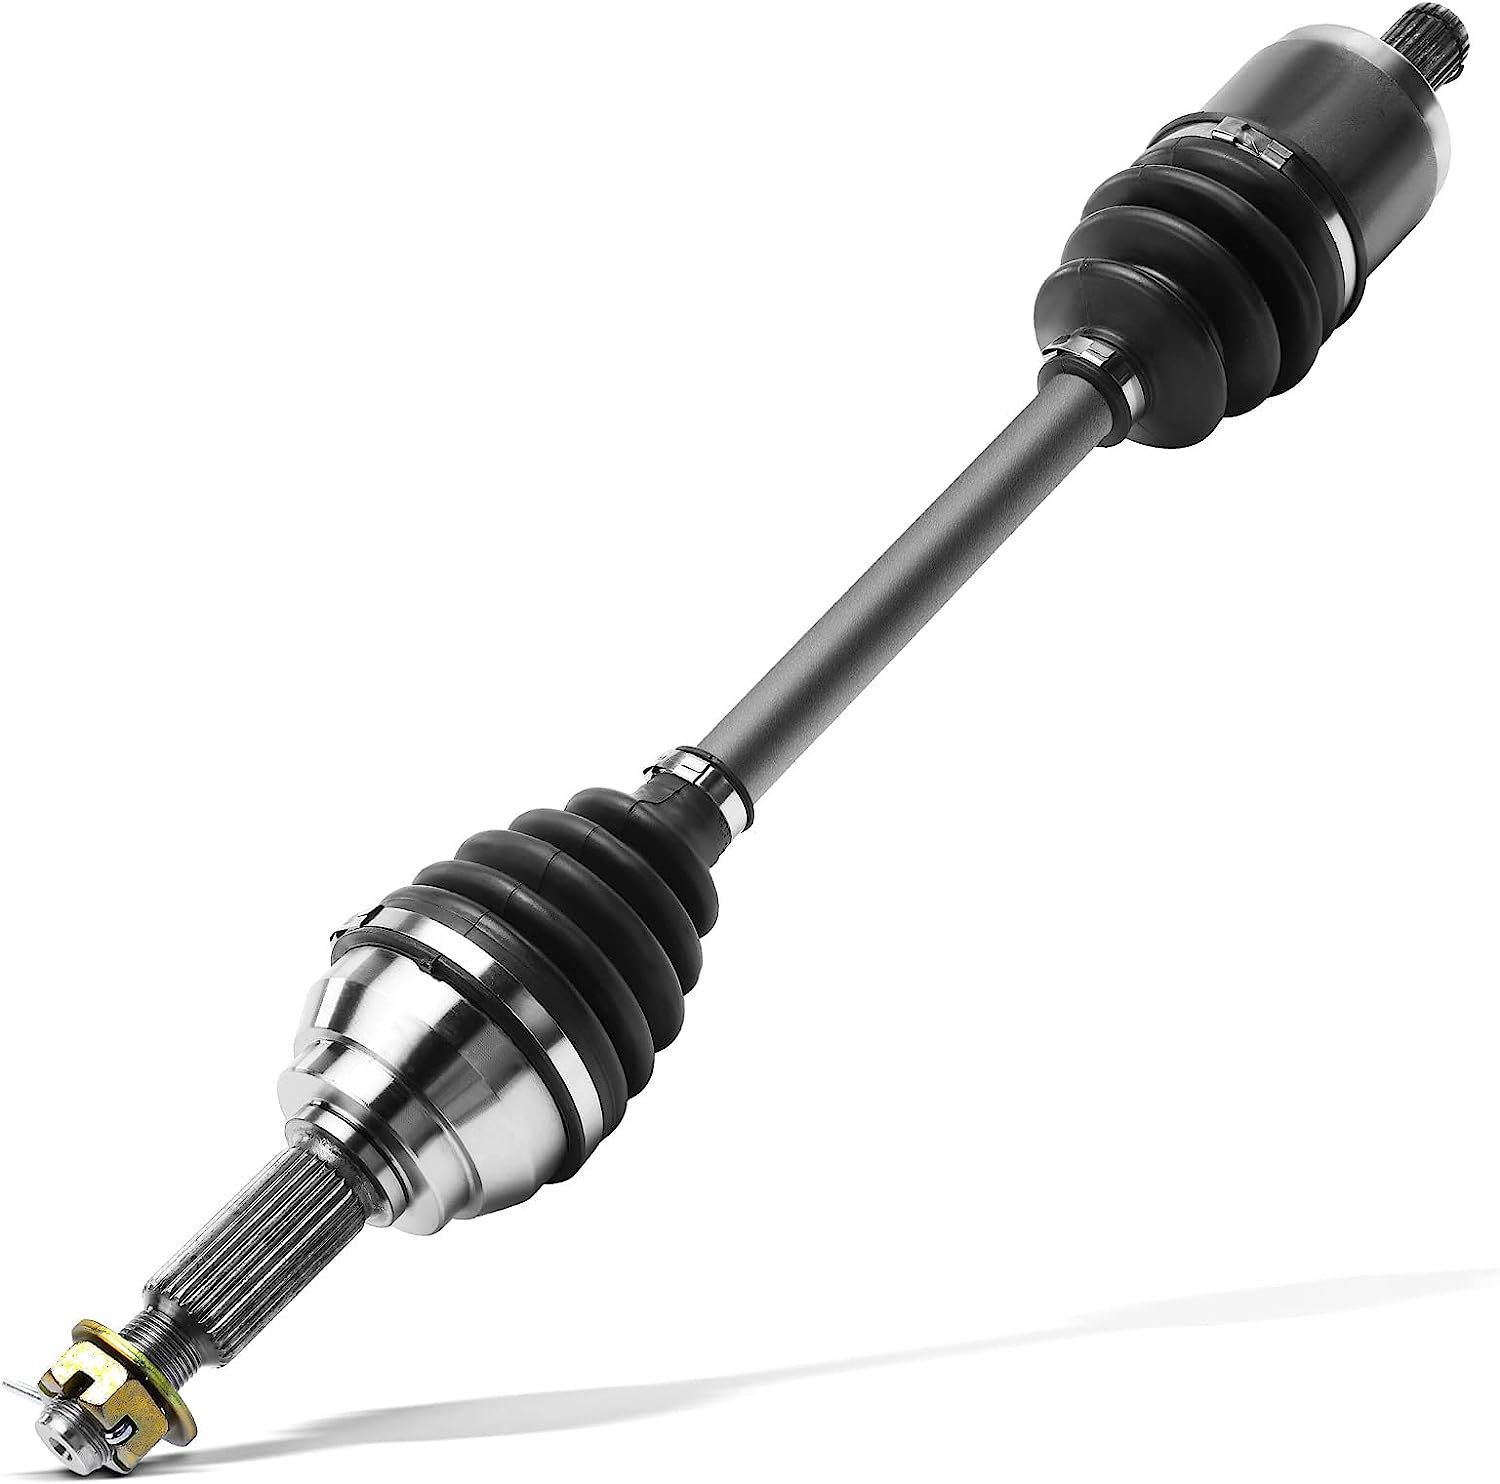 A-Premium CV Axle Shaft Assembly Compatible with John Deere Gator HPX 4X4 2010 2011 2012, Gator HPX 4x4 Diesel 2010 2011 2012, Front Right Passenger Side, Replace# JD394 - image 1 of 9